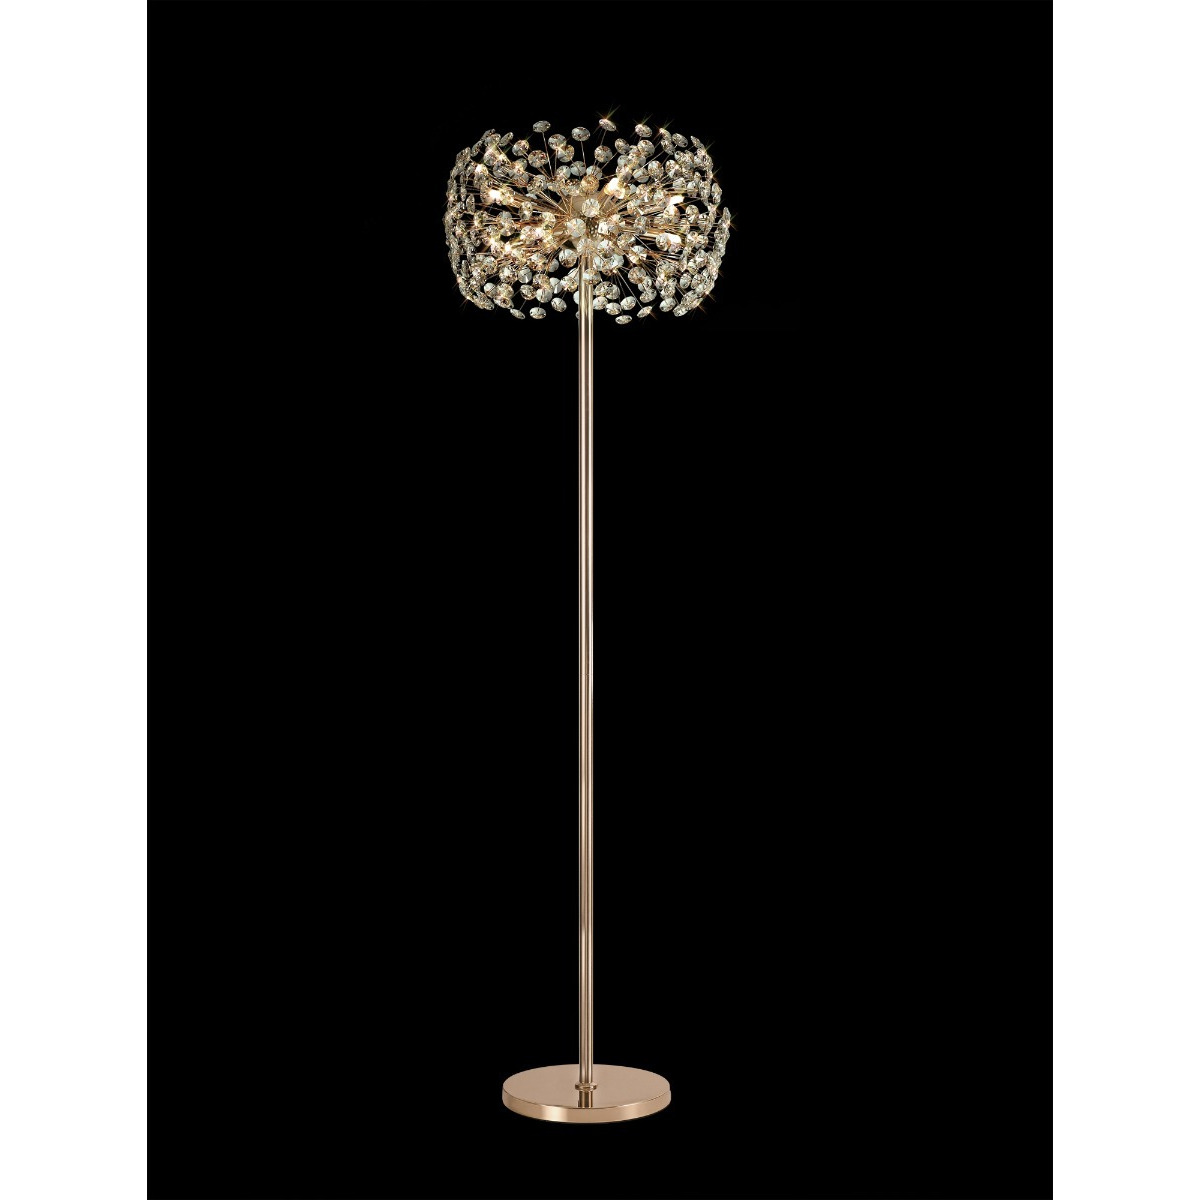 Fusion Floor Lamp 8 Light in a French Gold Finish and Clear Crystal